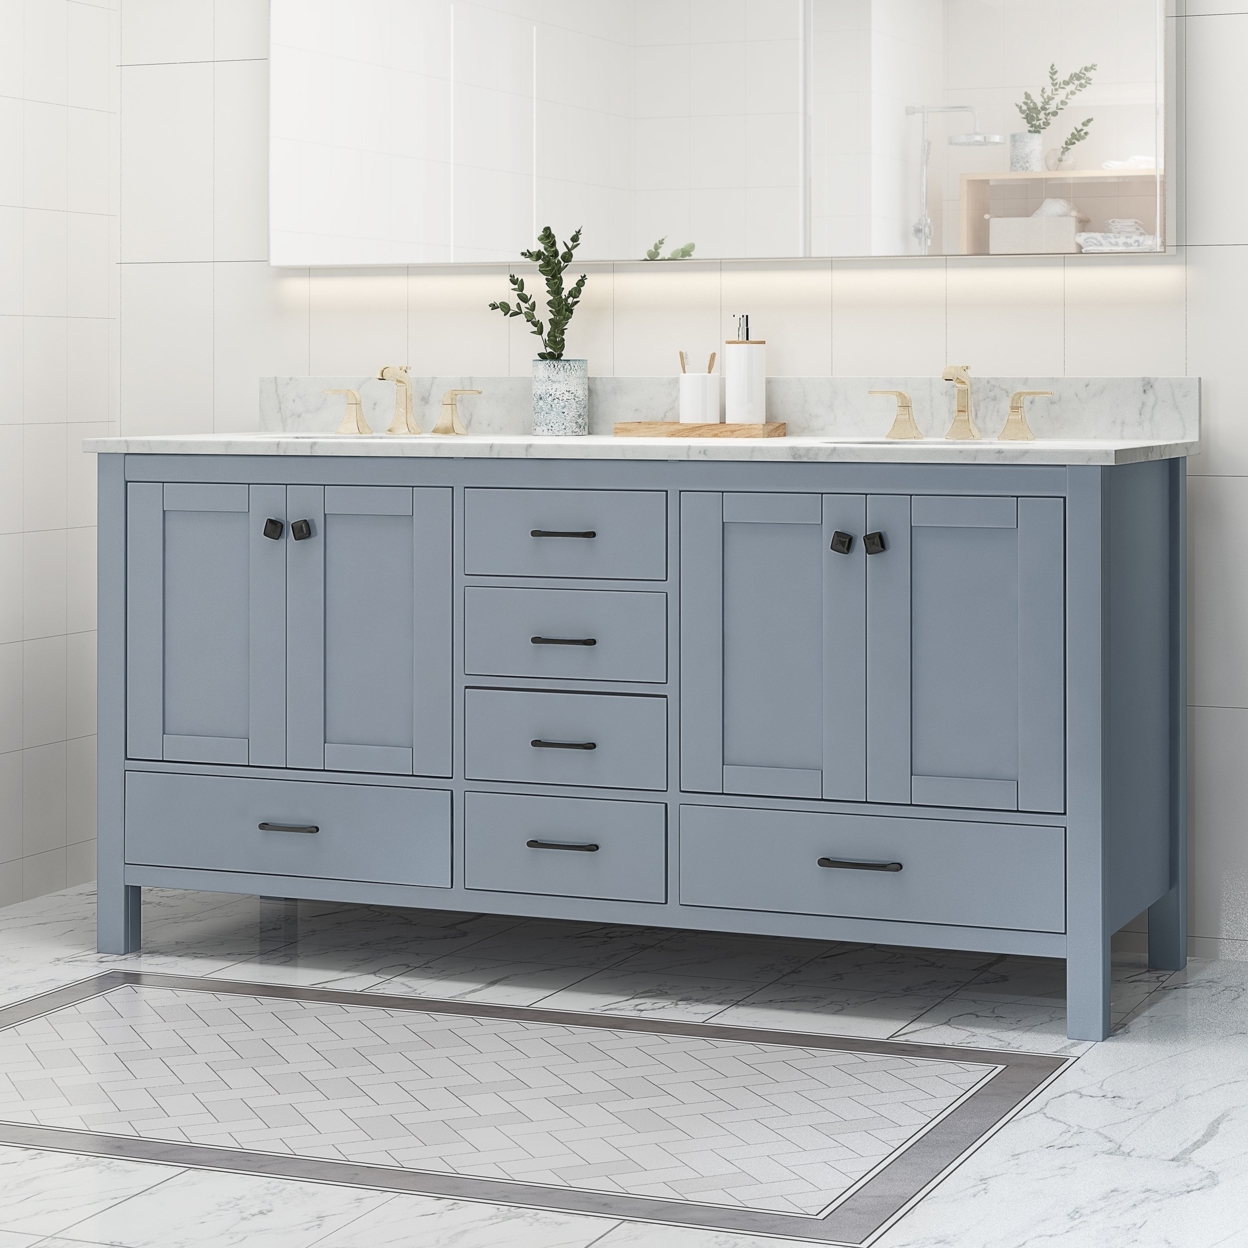 Laranne Contemporary 72 Wood Double Sink Bathroom Vanity With Marble Counter Top With Carrara White Marble - Gray